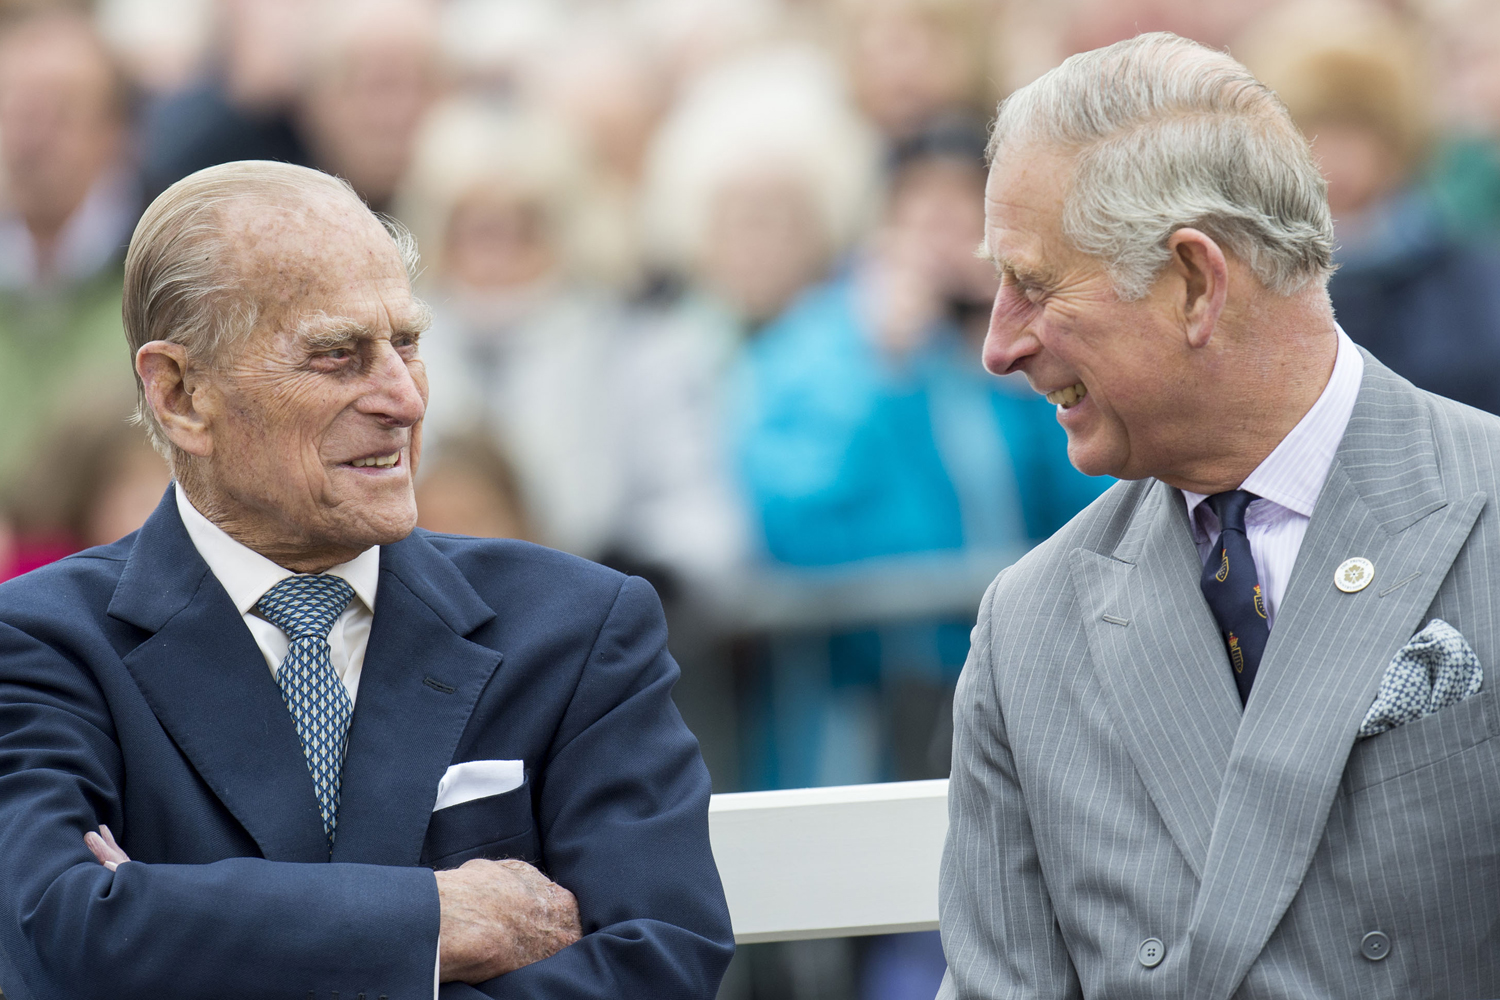 Prince Philip Dies on Son Prince Charles's Wedding Anniversary to Camilla, Duchess of Cornwall